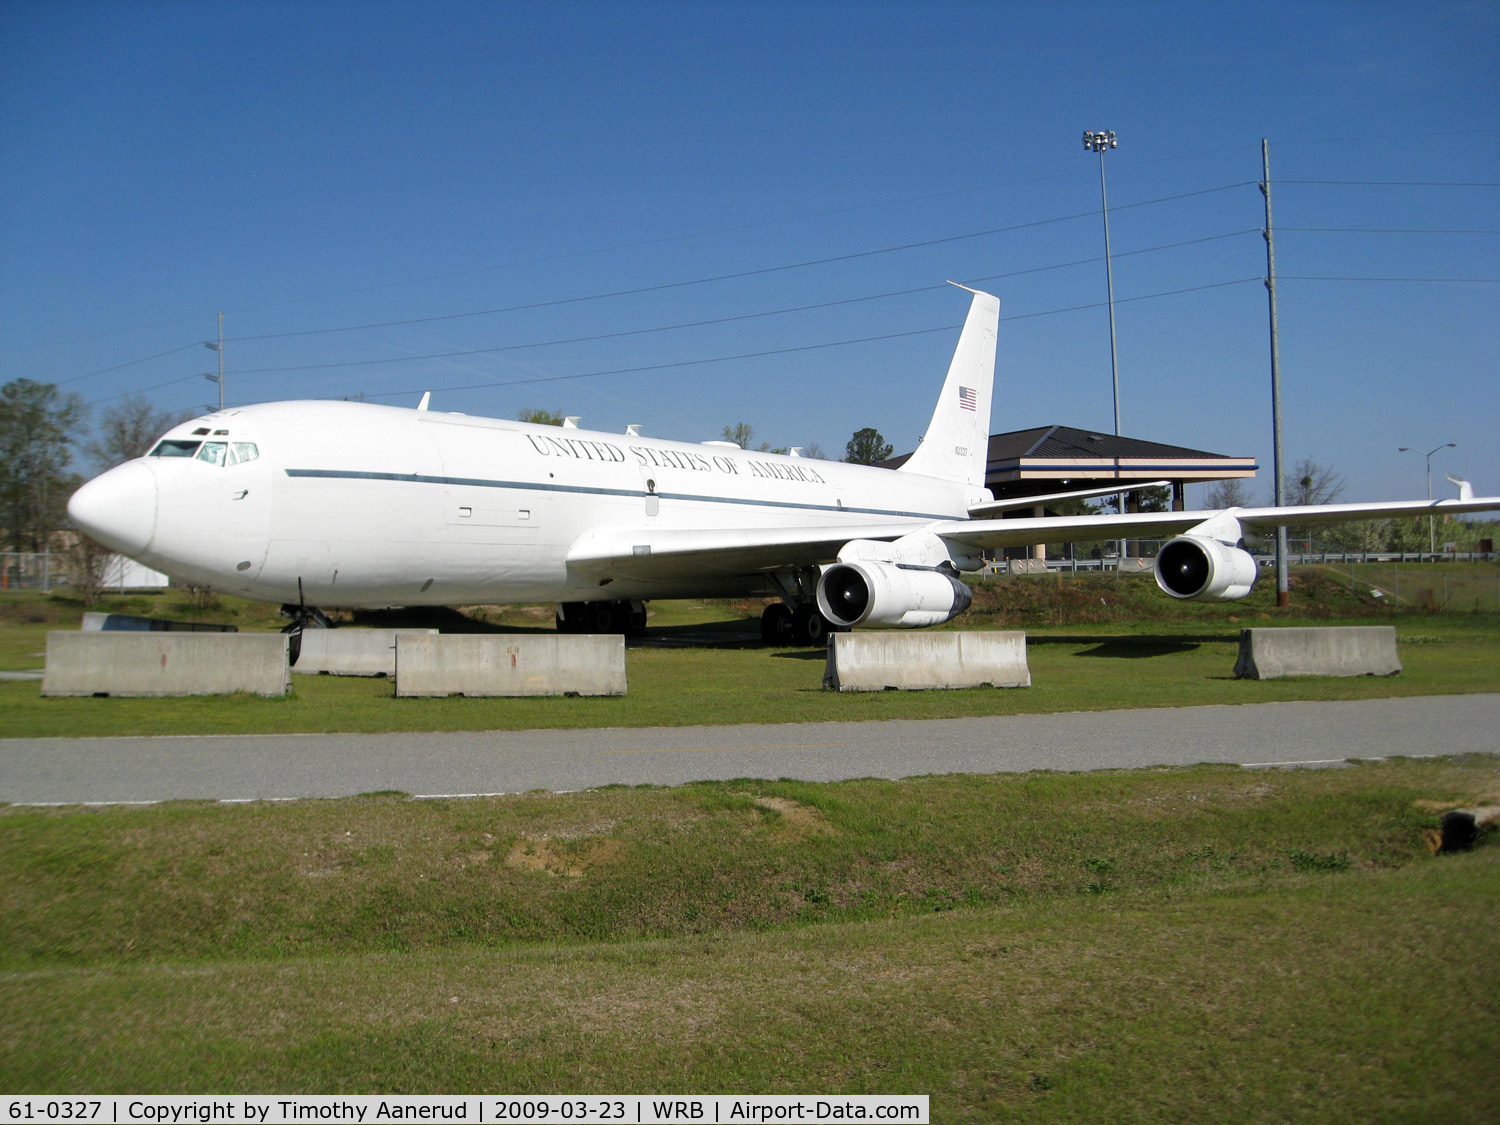 61-0327, 1961 Boeing EC-135N Stratolifter C/N 18234, Museum of Aviation, Robins AFB